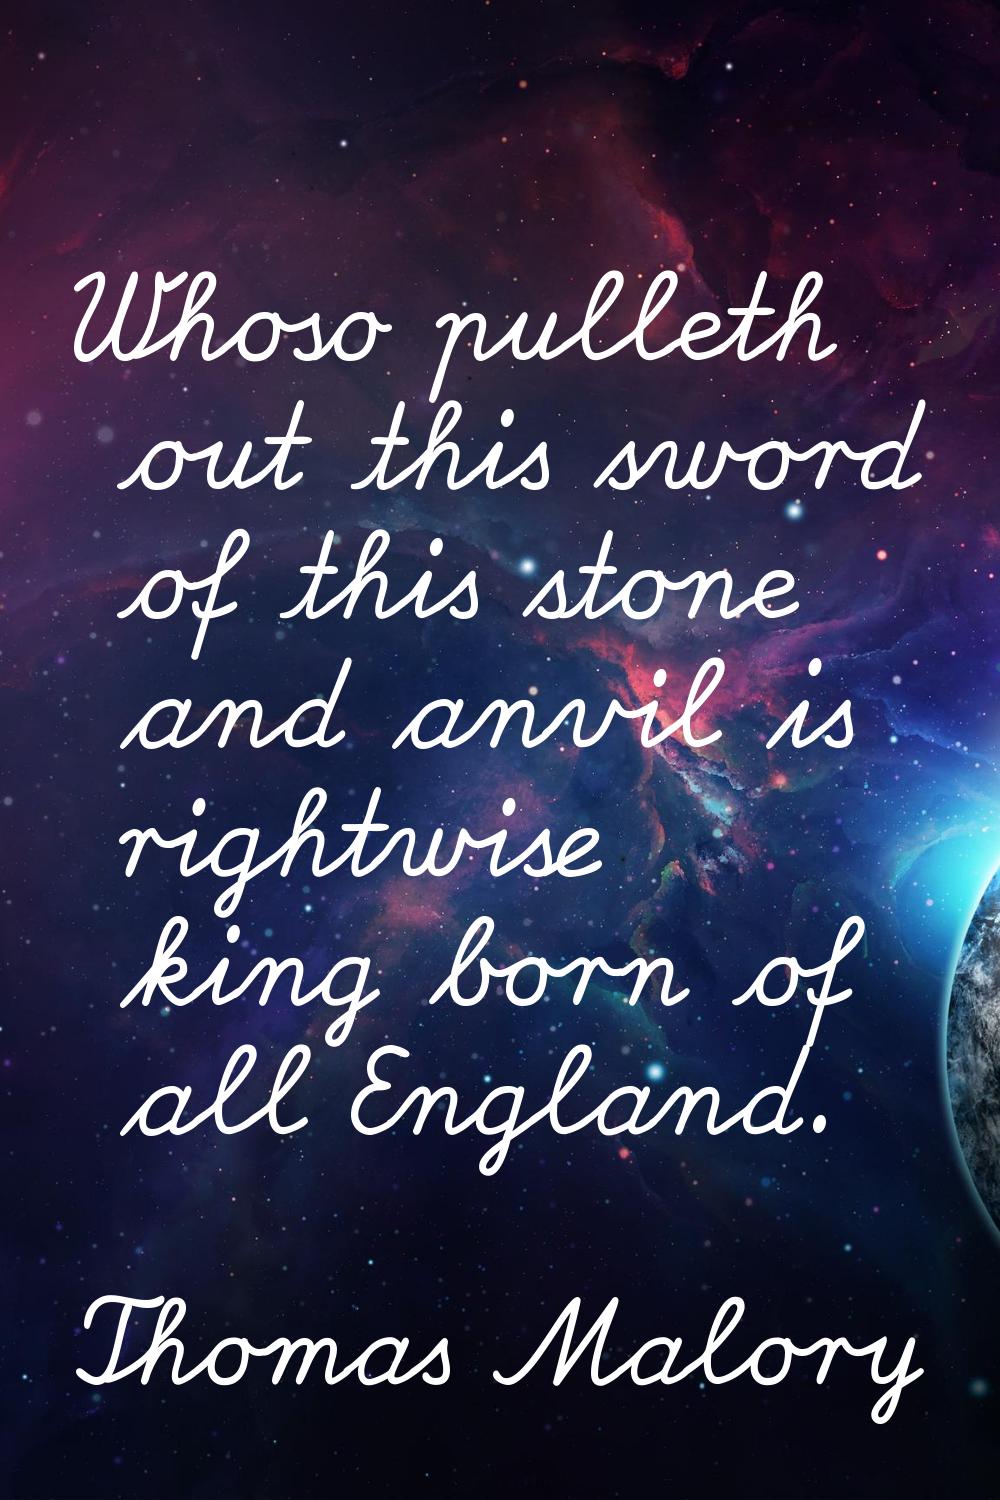 Whoso pulleth out this sword of this stone and anvil is rightwise king born of all England.